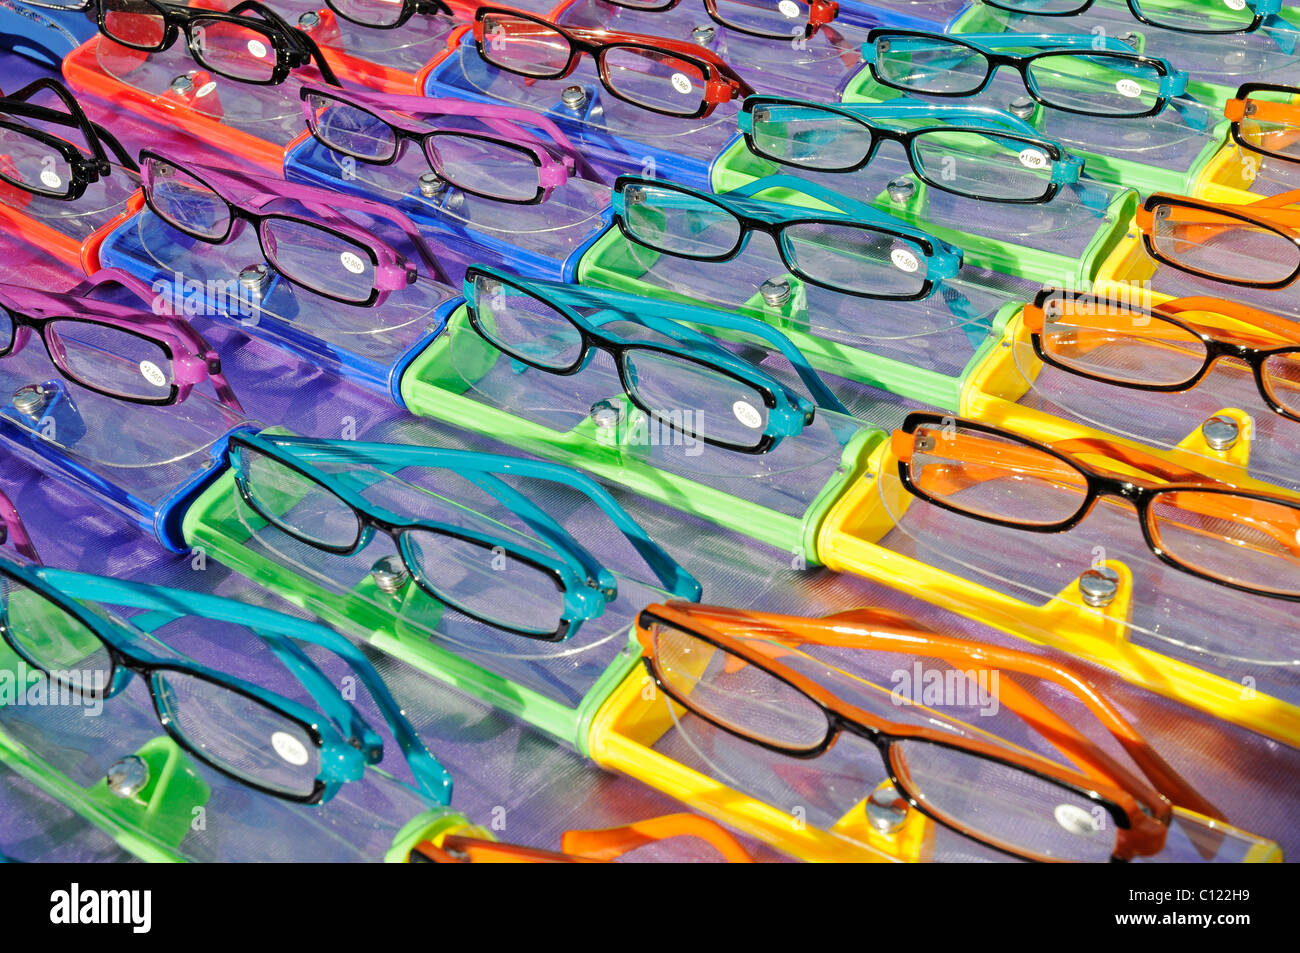 Colourful reading glasses for dale at a weekly market, Altea, Costa Blanca, Alicante province, Spain, Europe Stock Photo